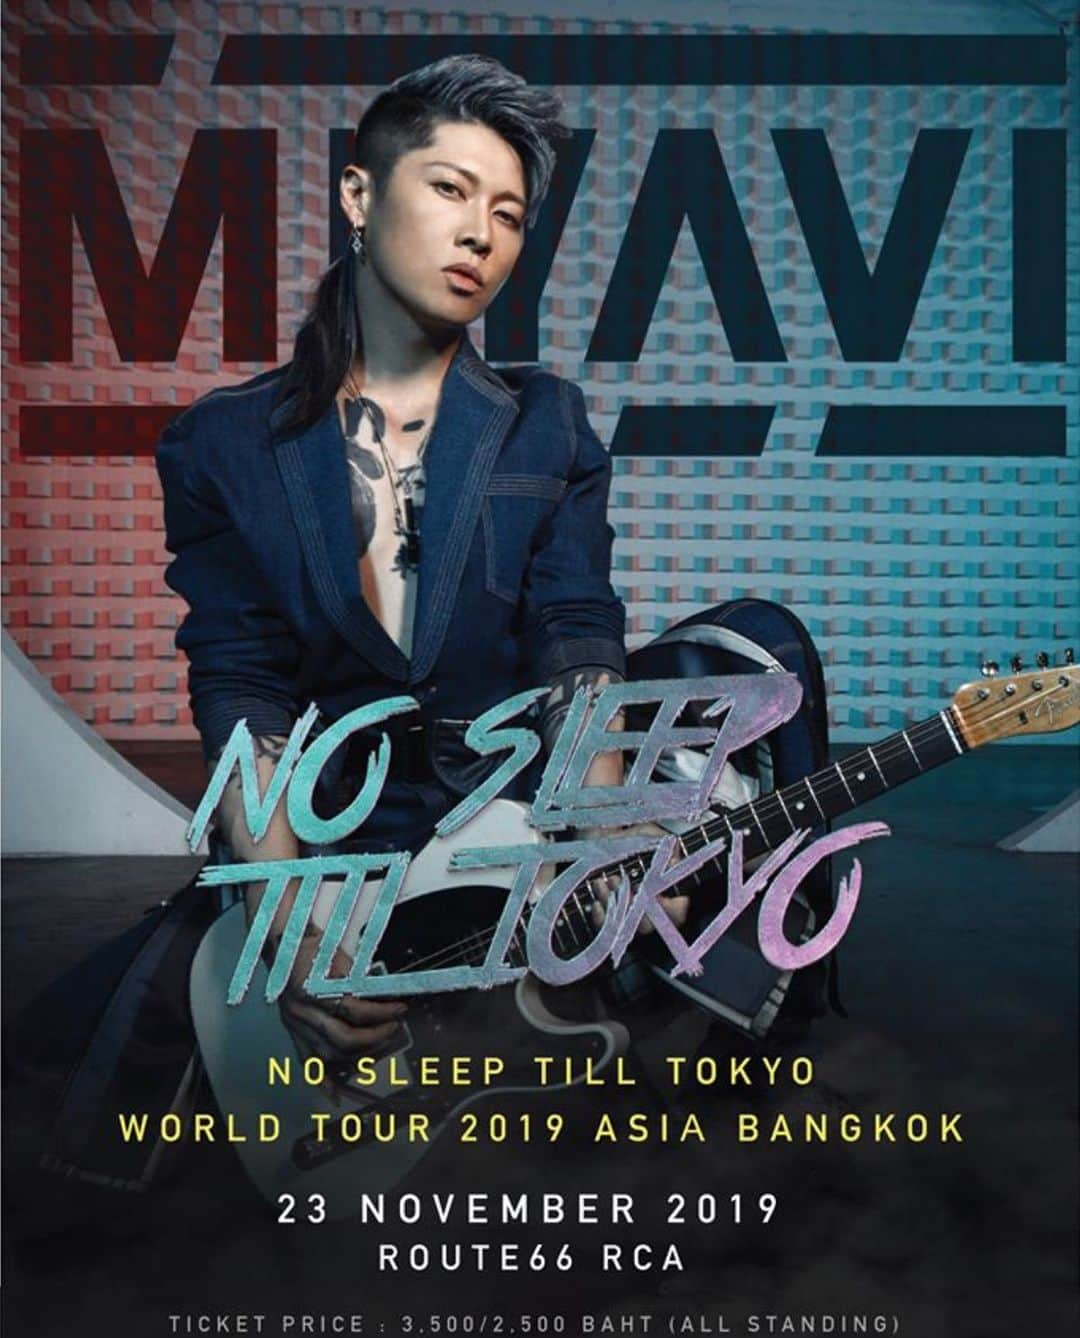 MIYAVI（石原貴雅）さんのインスタグラム写真 - (MIYAVI（石原貴雅）Instagram)「Important Announcement!  The Venue for MIYAVI NO SLEEP TILL TOKYO WORLD TOUR 2019 ASIA BANGKOK, taking place on 23 November 2019, 6pm (Door opens: 5.30pm) will be changed to Route66, RCA. The seating plan and ticket benefit remains unchanged. There will be no age restriction for this event.  Those who have already received the ticket can use the original ticket to enter.  We apologize for any inconvenience this change may cause.  ประกาศเปลี่ยนแปลงสถานที่จัดคอนเสิร์ต  MIYAVI NO SLEEP TILL TOKYO WORLD TOUR 2019 ASIA BANGKOK ในวันที่ 23 พฤศจิกายน 2562  ไปยัง  Route 66 RCA เวลา 18:00 น. (ประตูเปิด 17:30 น.) โดยผังและสิทธิพิเศษไม่มีการเปลี่ยนแปลง และไม่จำกัดอายุการเข้าชม บัตรคอนเสิร์ตใบเดิมสามารถใช้เข้าชมได้โดยไม่ต้องเปลี่ยนบัตร  บริษัทขออภัยในความไม่สะดวกมา ณ โอกาสนี้ด้วยค่ะ  緊急案内！  １１月２３日に開催予定のMIYAVI NO SLEEP TILL TOKYO WORLD TOUR 2019 ASIA BANGKOKの会場が現地での諸事情によりRoute66, RCAに変更となりました。変更に伴いご来場の皆様にご迷惑をおかけしてしまい大変申し訳ございません。  開場・開演時間に変更はなく、会場は17:30、開演は18:00を予定しております。 *お買い求めいただいておりますチケットは変更先の会場でもお使いいただけます。 *チケット特典・整理券の順番も反映されます。 *会場に年齢制限はございません。  その他ご質問・お問い合わせはプロモーター・会場の方までお問い合わせください。  当日みなさまのご来場を心よりお待ちしております。  #MIYAVI #NOSLEEPTILLTOKYO #NSTT #ASIA #Thailand #Bangkok」11月14日 19時56分 - miyavi_staff